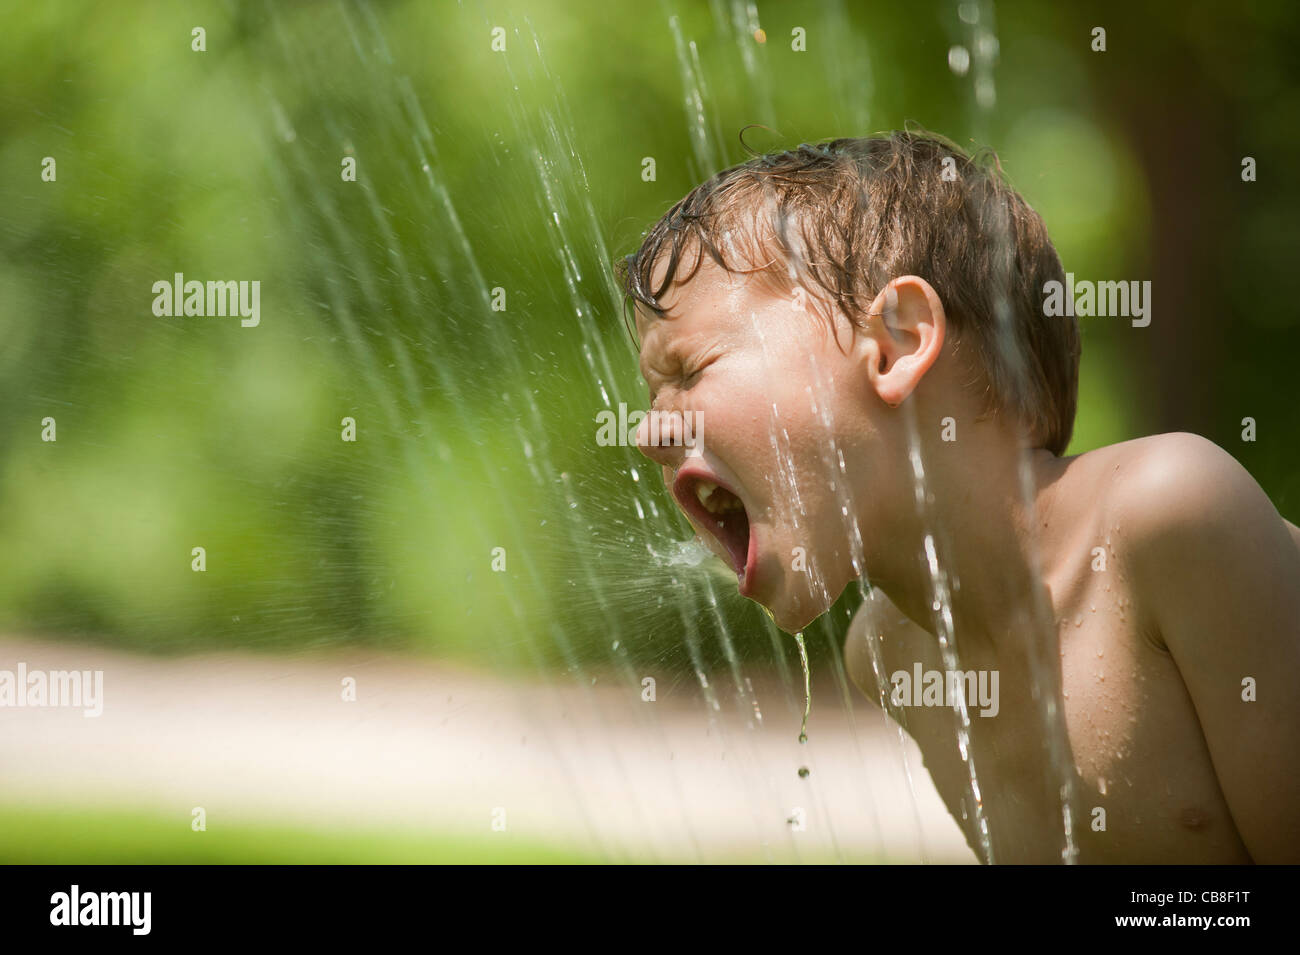 A boy tries to take a drink from a water sprinkler. Stock Photo